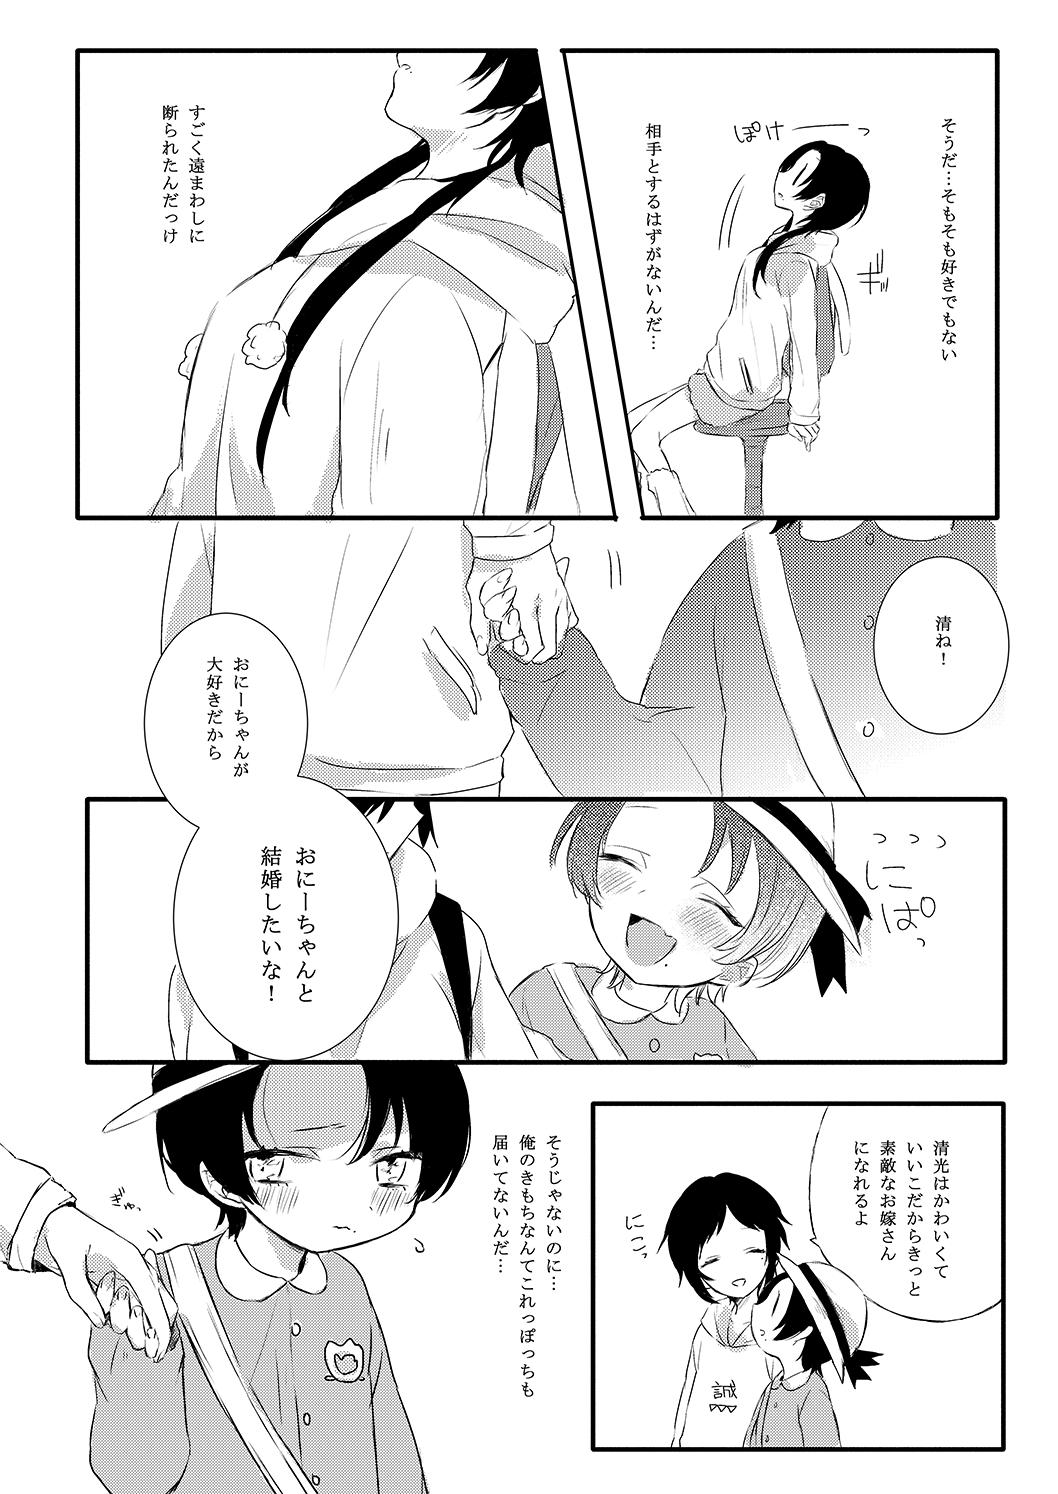 No Condom BROTHER COMPLEX + SISTER COMPLEX - Touken ranbu Reversecowgirl - Page 7